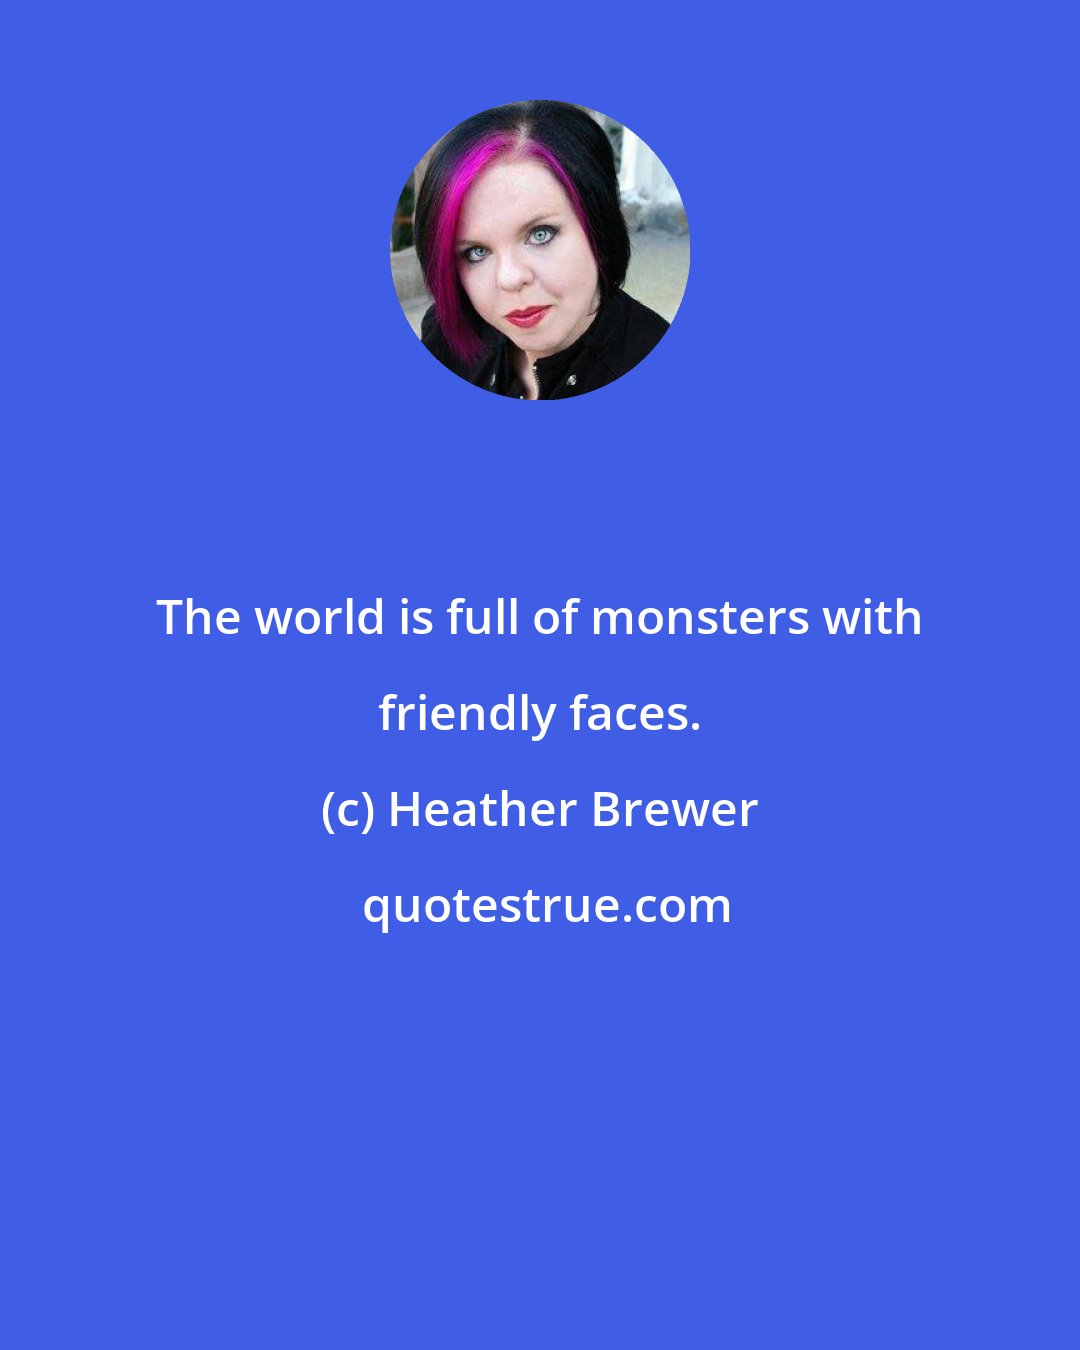 Heather Brewer: The world is full of monsters with friendly faces.